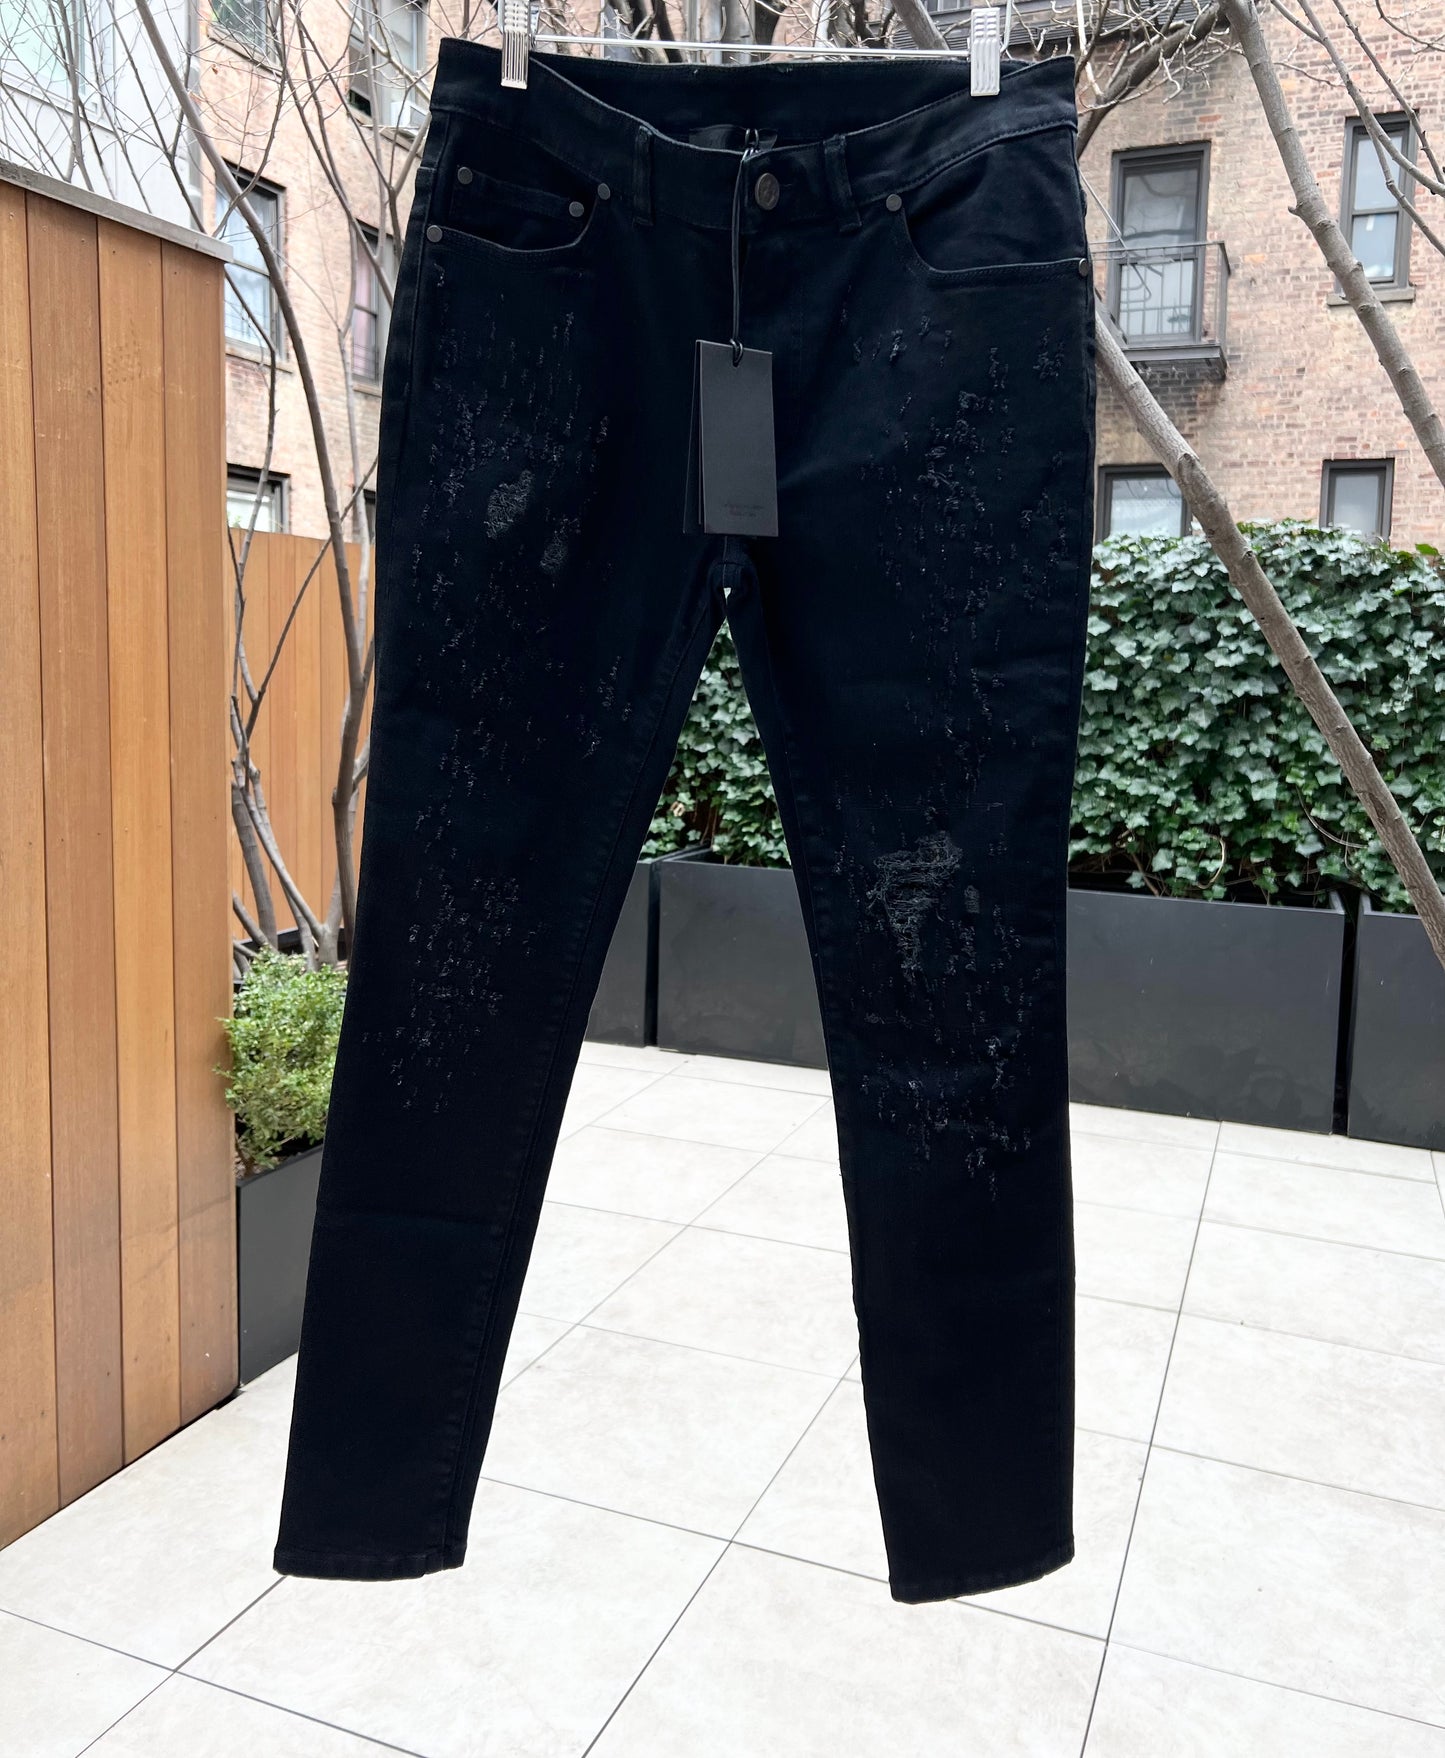 RH45 premium denim jeans with tags displayed outdoors.